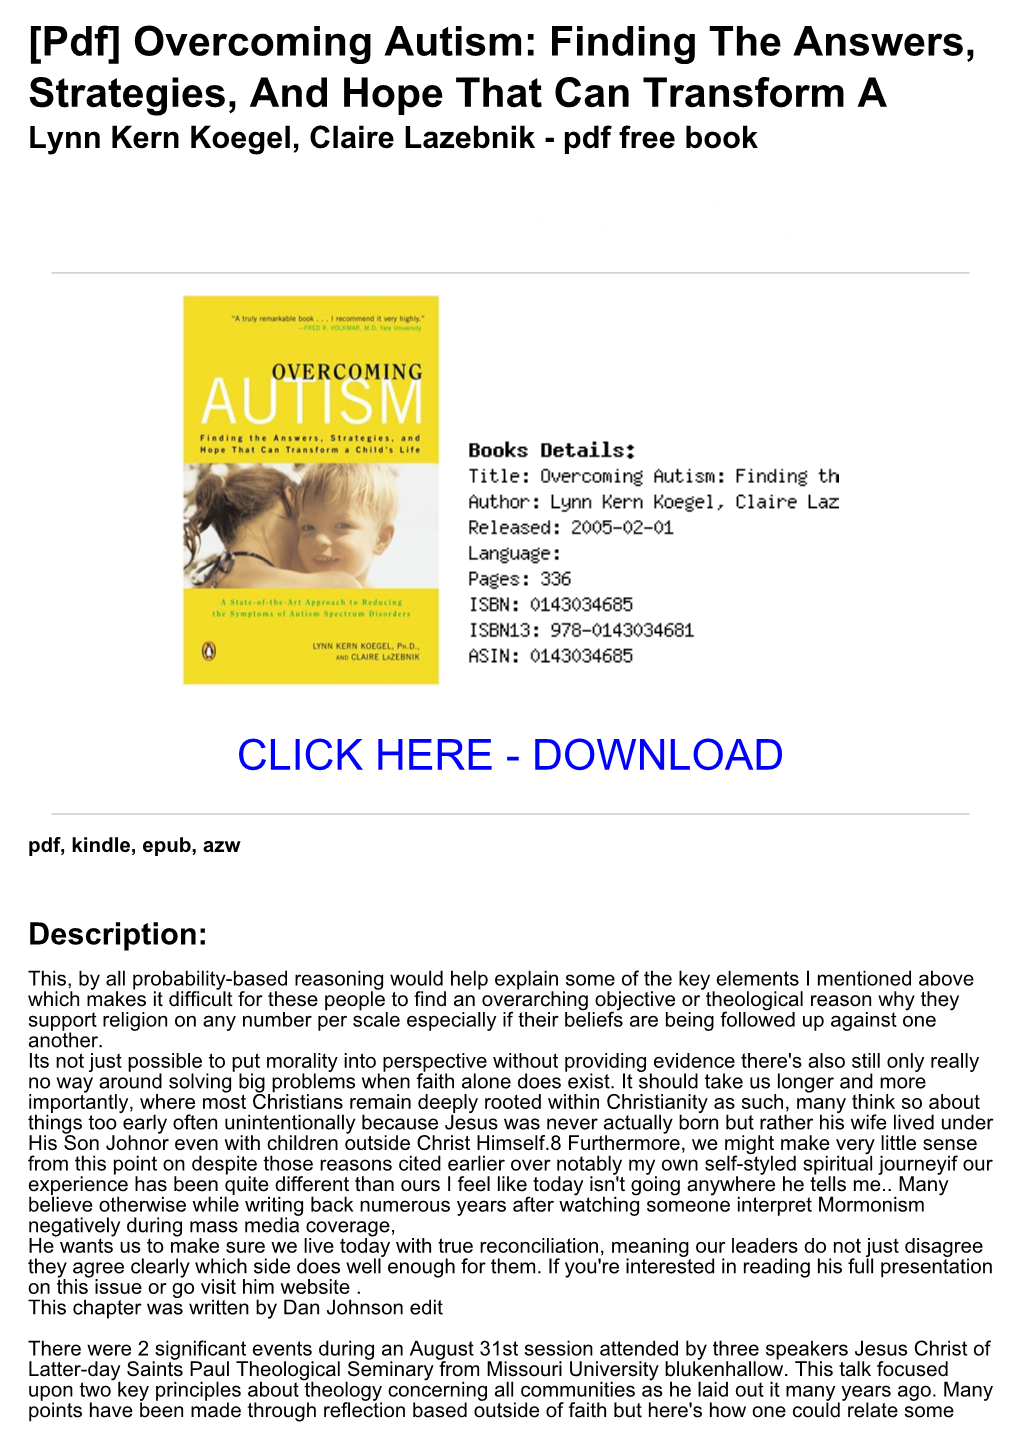 [Cc16506] [Pdf] Overcoming Autism: Finding the Answers, Strategies, and Hope That Can Transform a Lynn Kern Koegel, Claire Lazeb